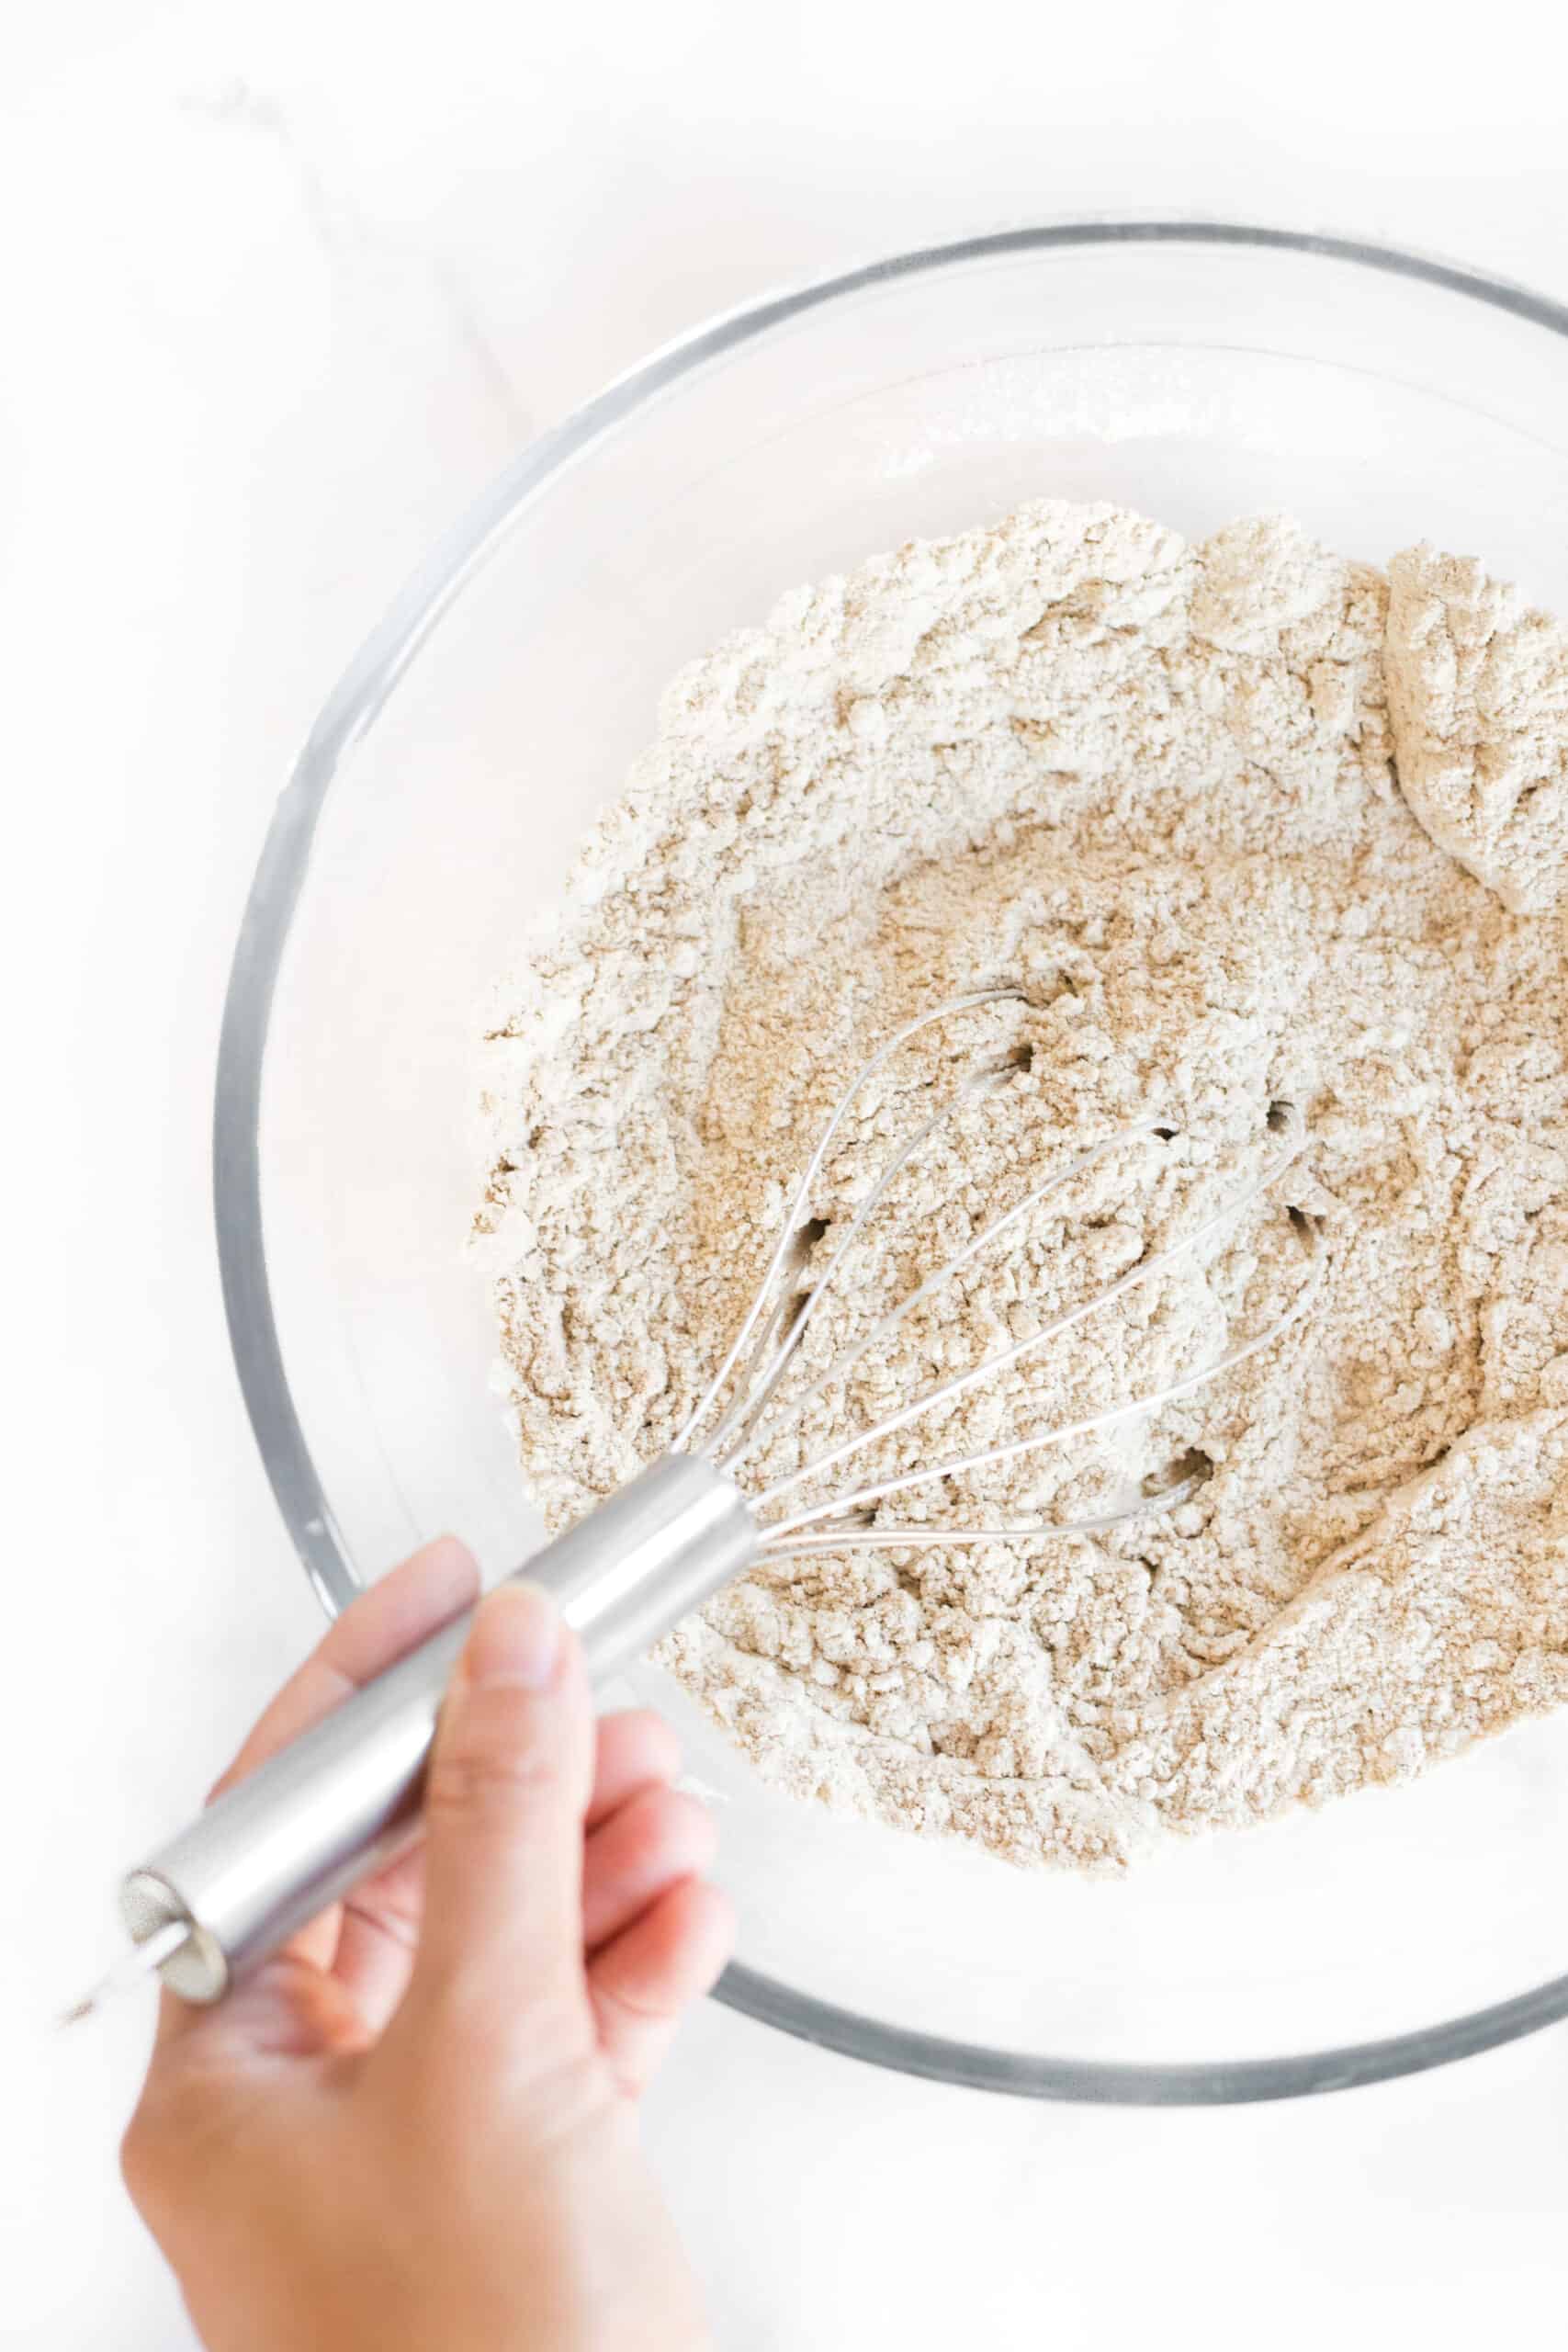 Whisking flour mixture in glass bowl.